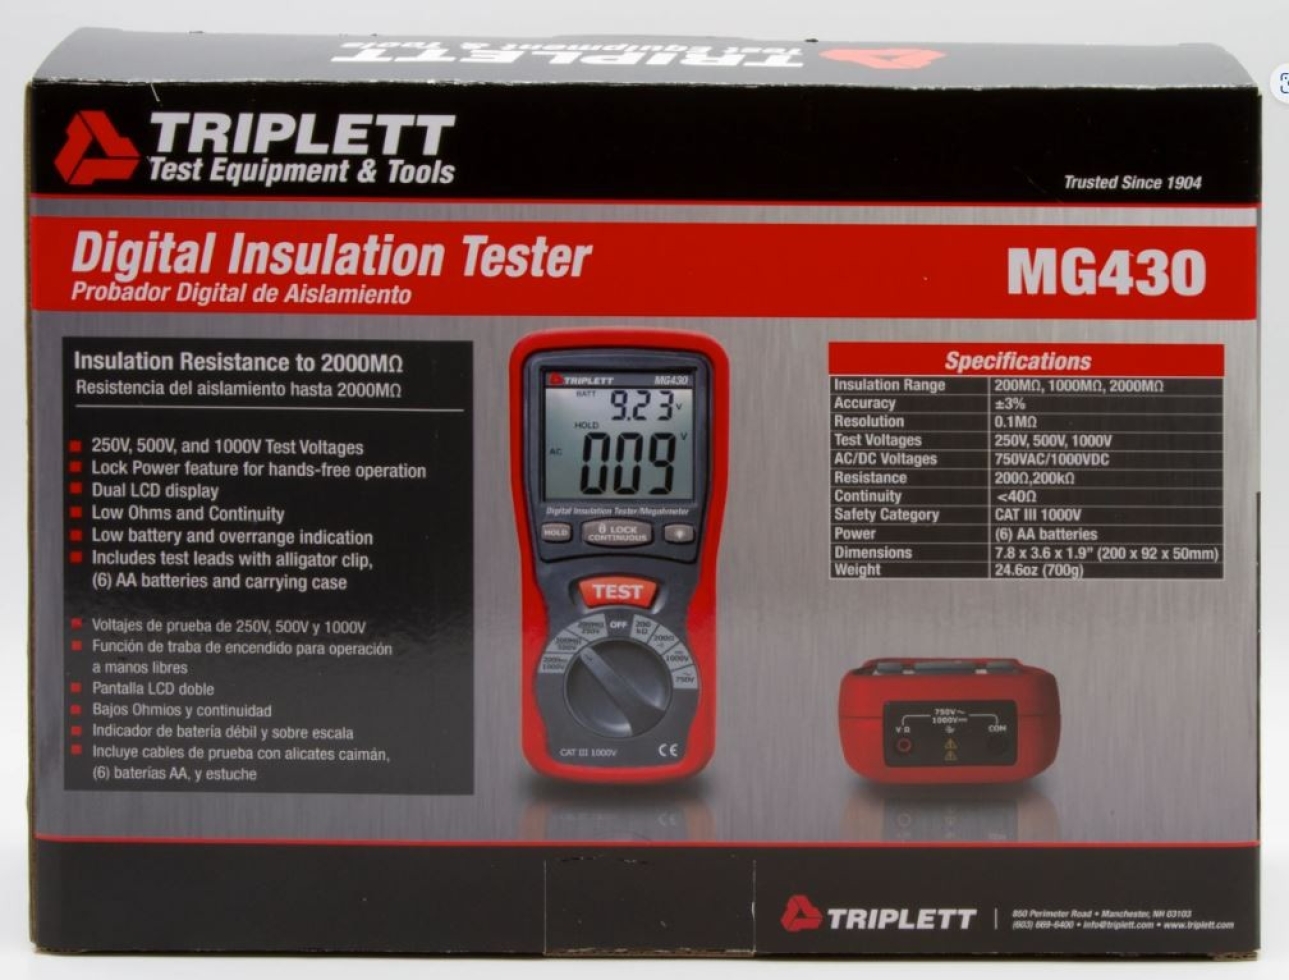 Digital Insulation Tester - Tests Insulation Resistance to 2000MΩ, CAT III 1000V - (MG430)